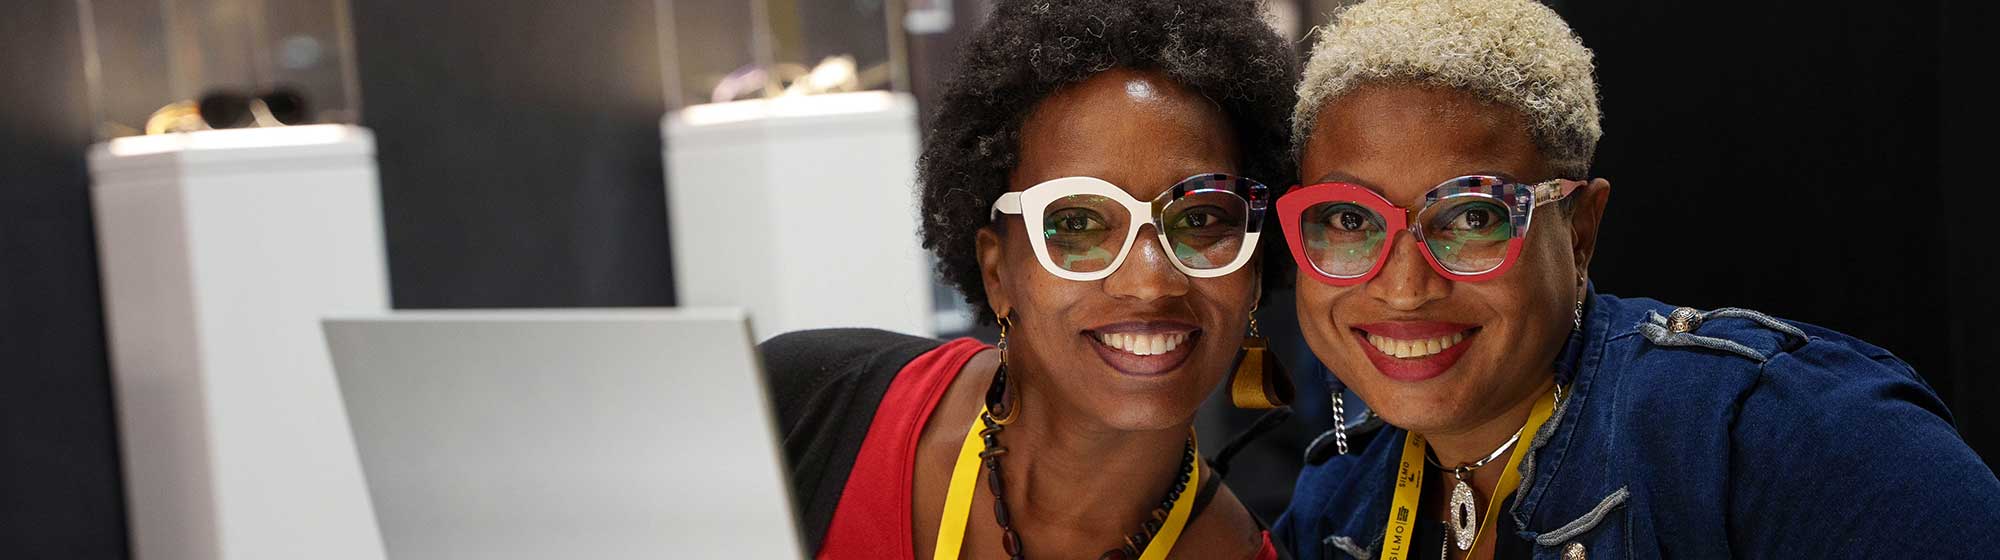 Two women smiling with glasses